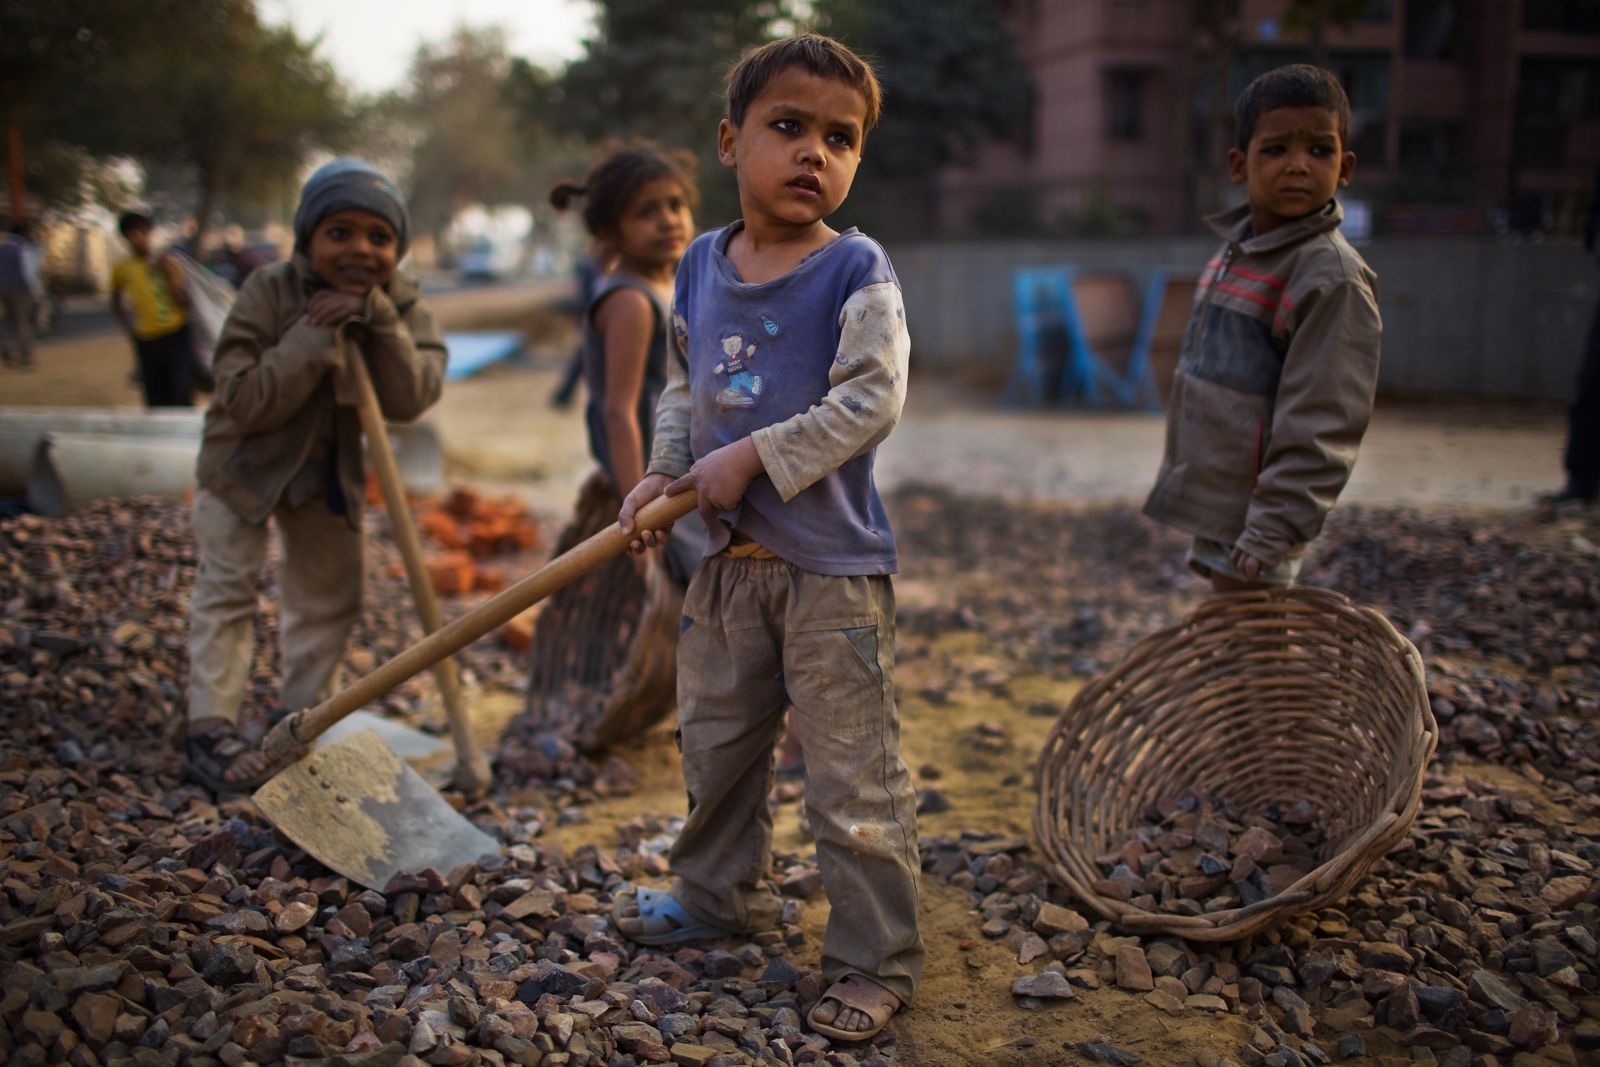 India: Unicef concerned about new child labour law that allows children